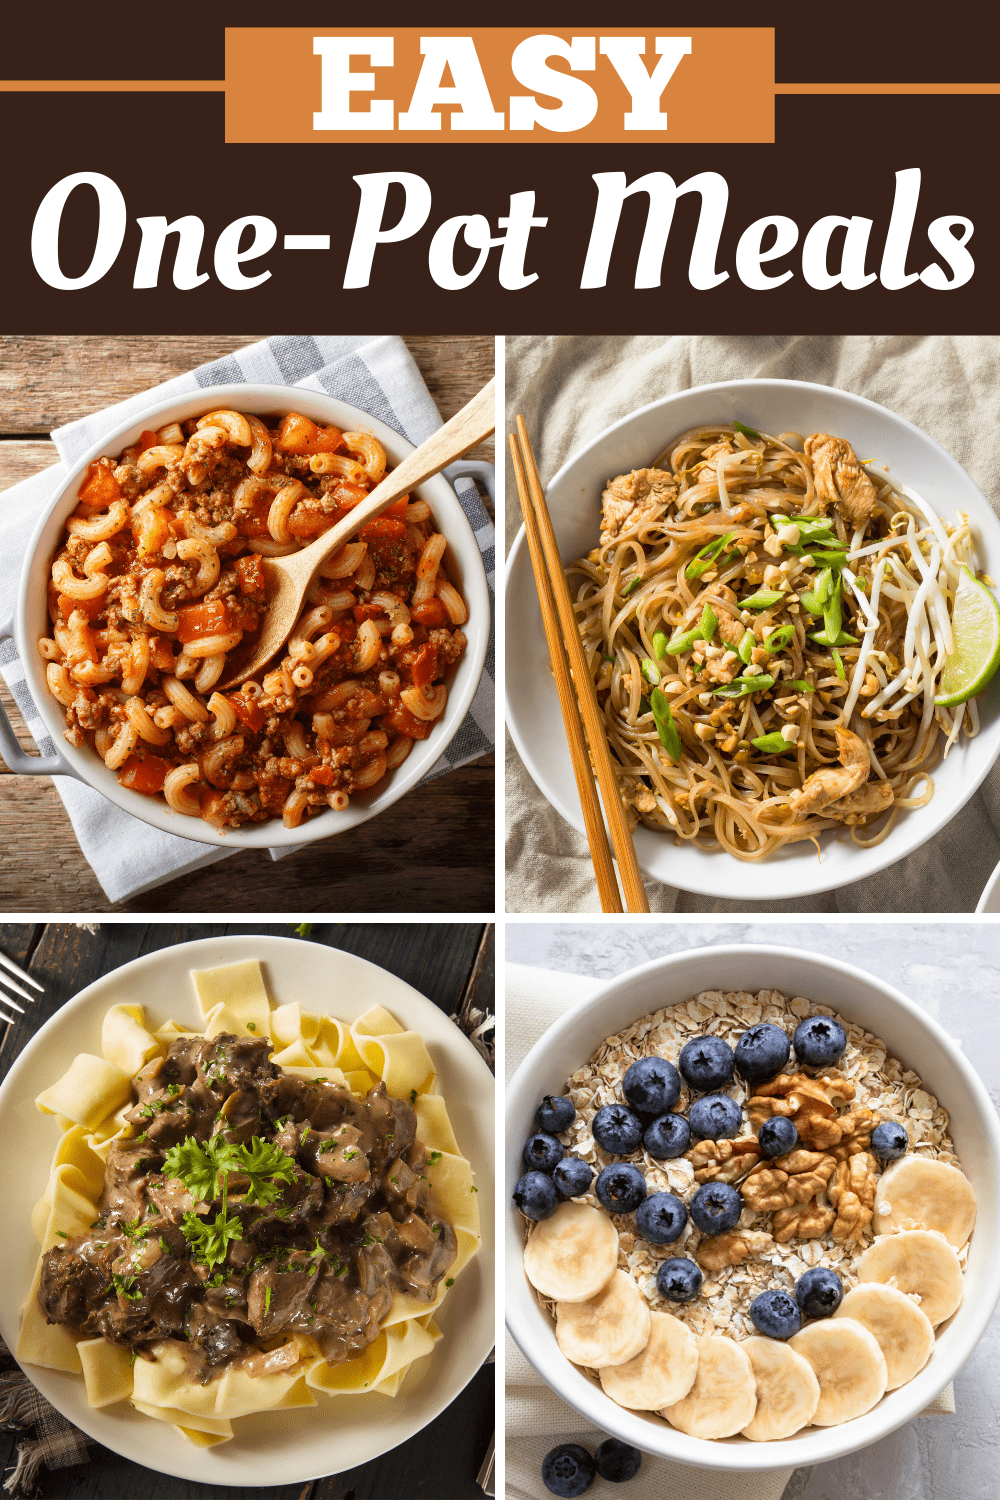 24 Easy One-Pot Meals and Dinner Ideas - Insanely Good